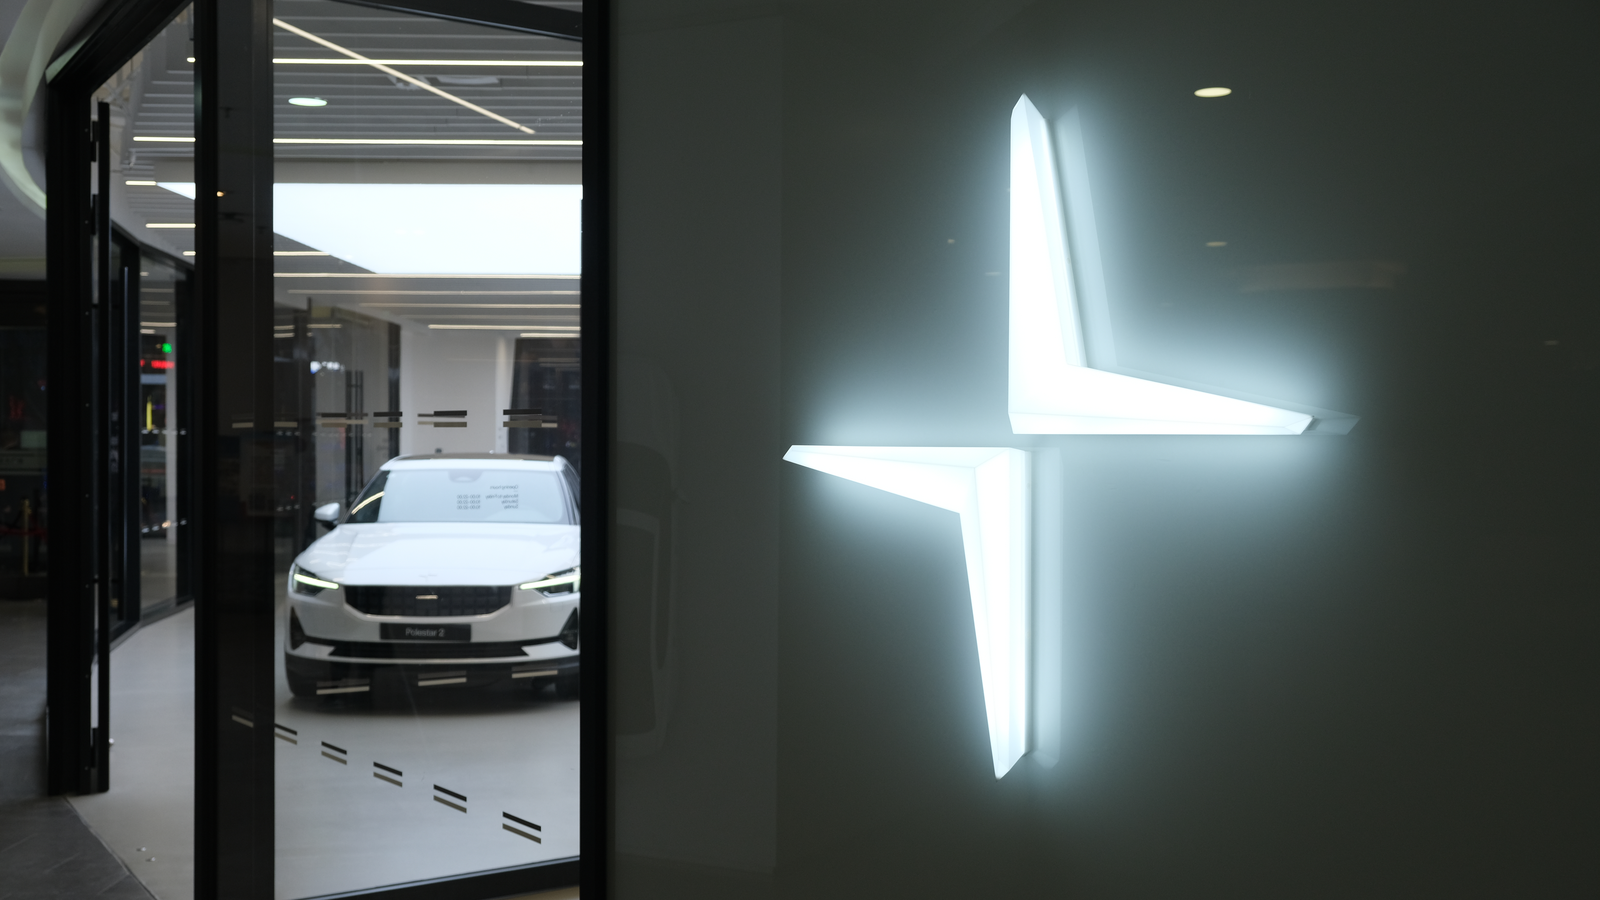 Close up Polestar logo with electric car in store. Polestar (PSNY) is a Swedish automotive brand owned by Volvo Cars and Geely